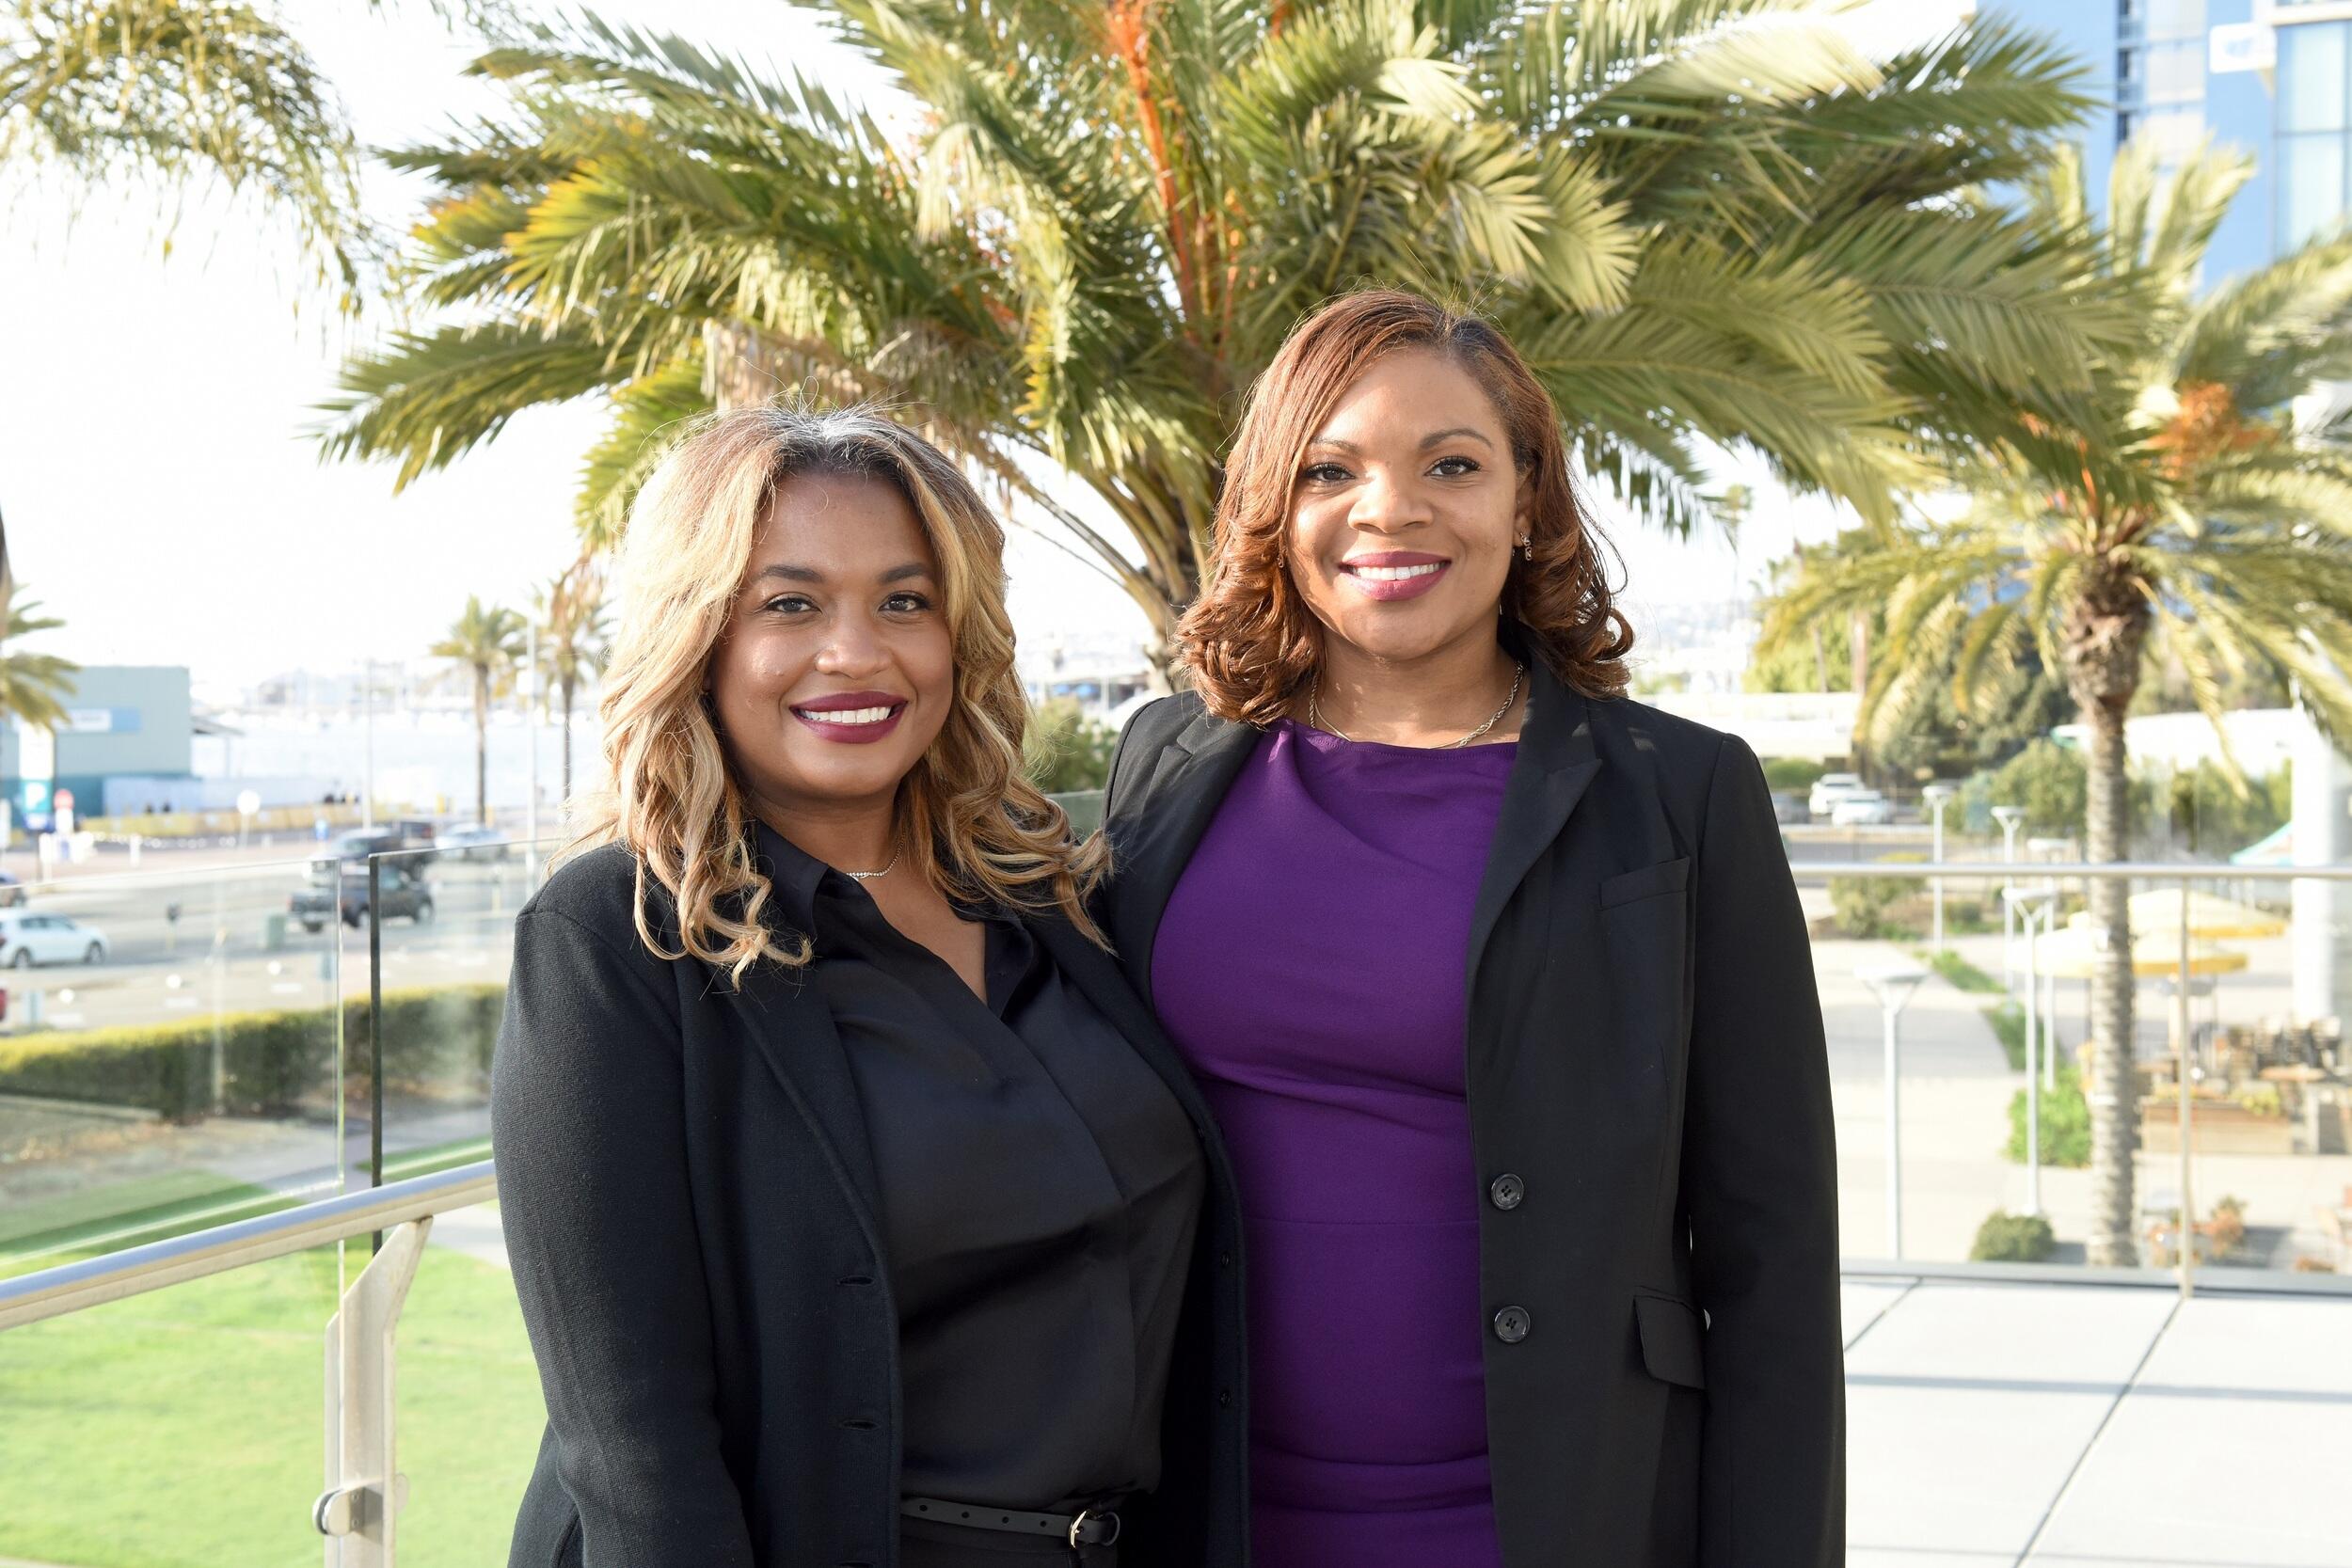 Two women standing next to each other in front of palm trees